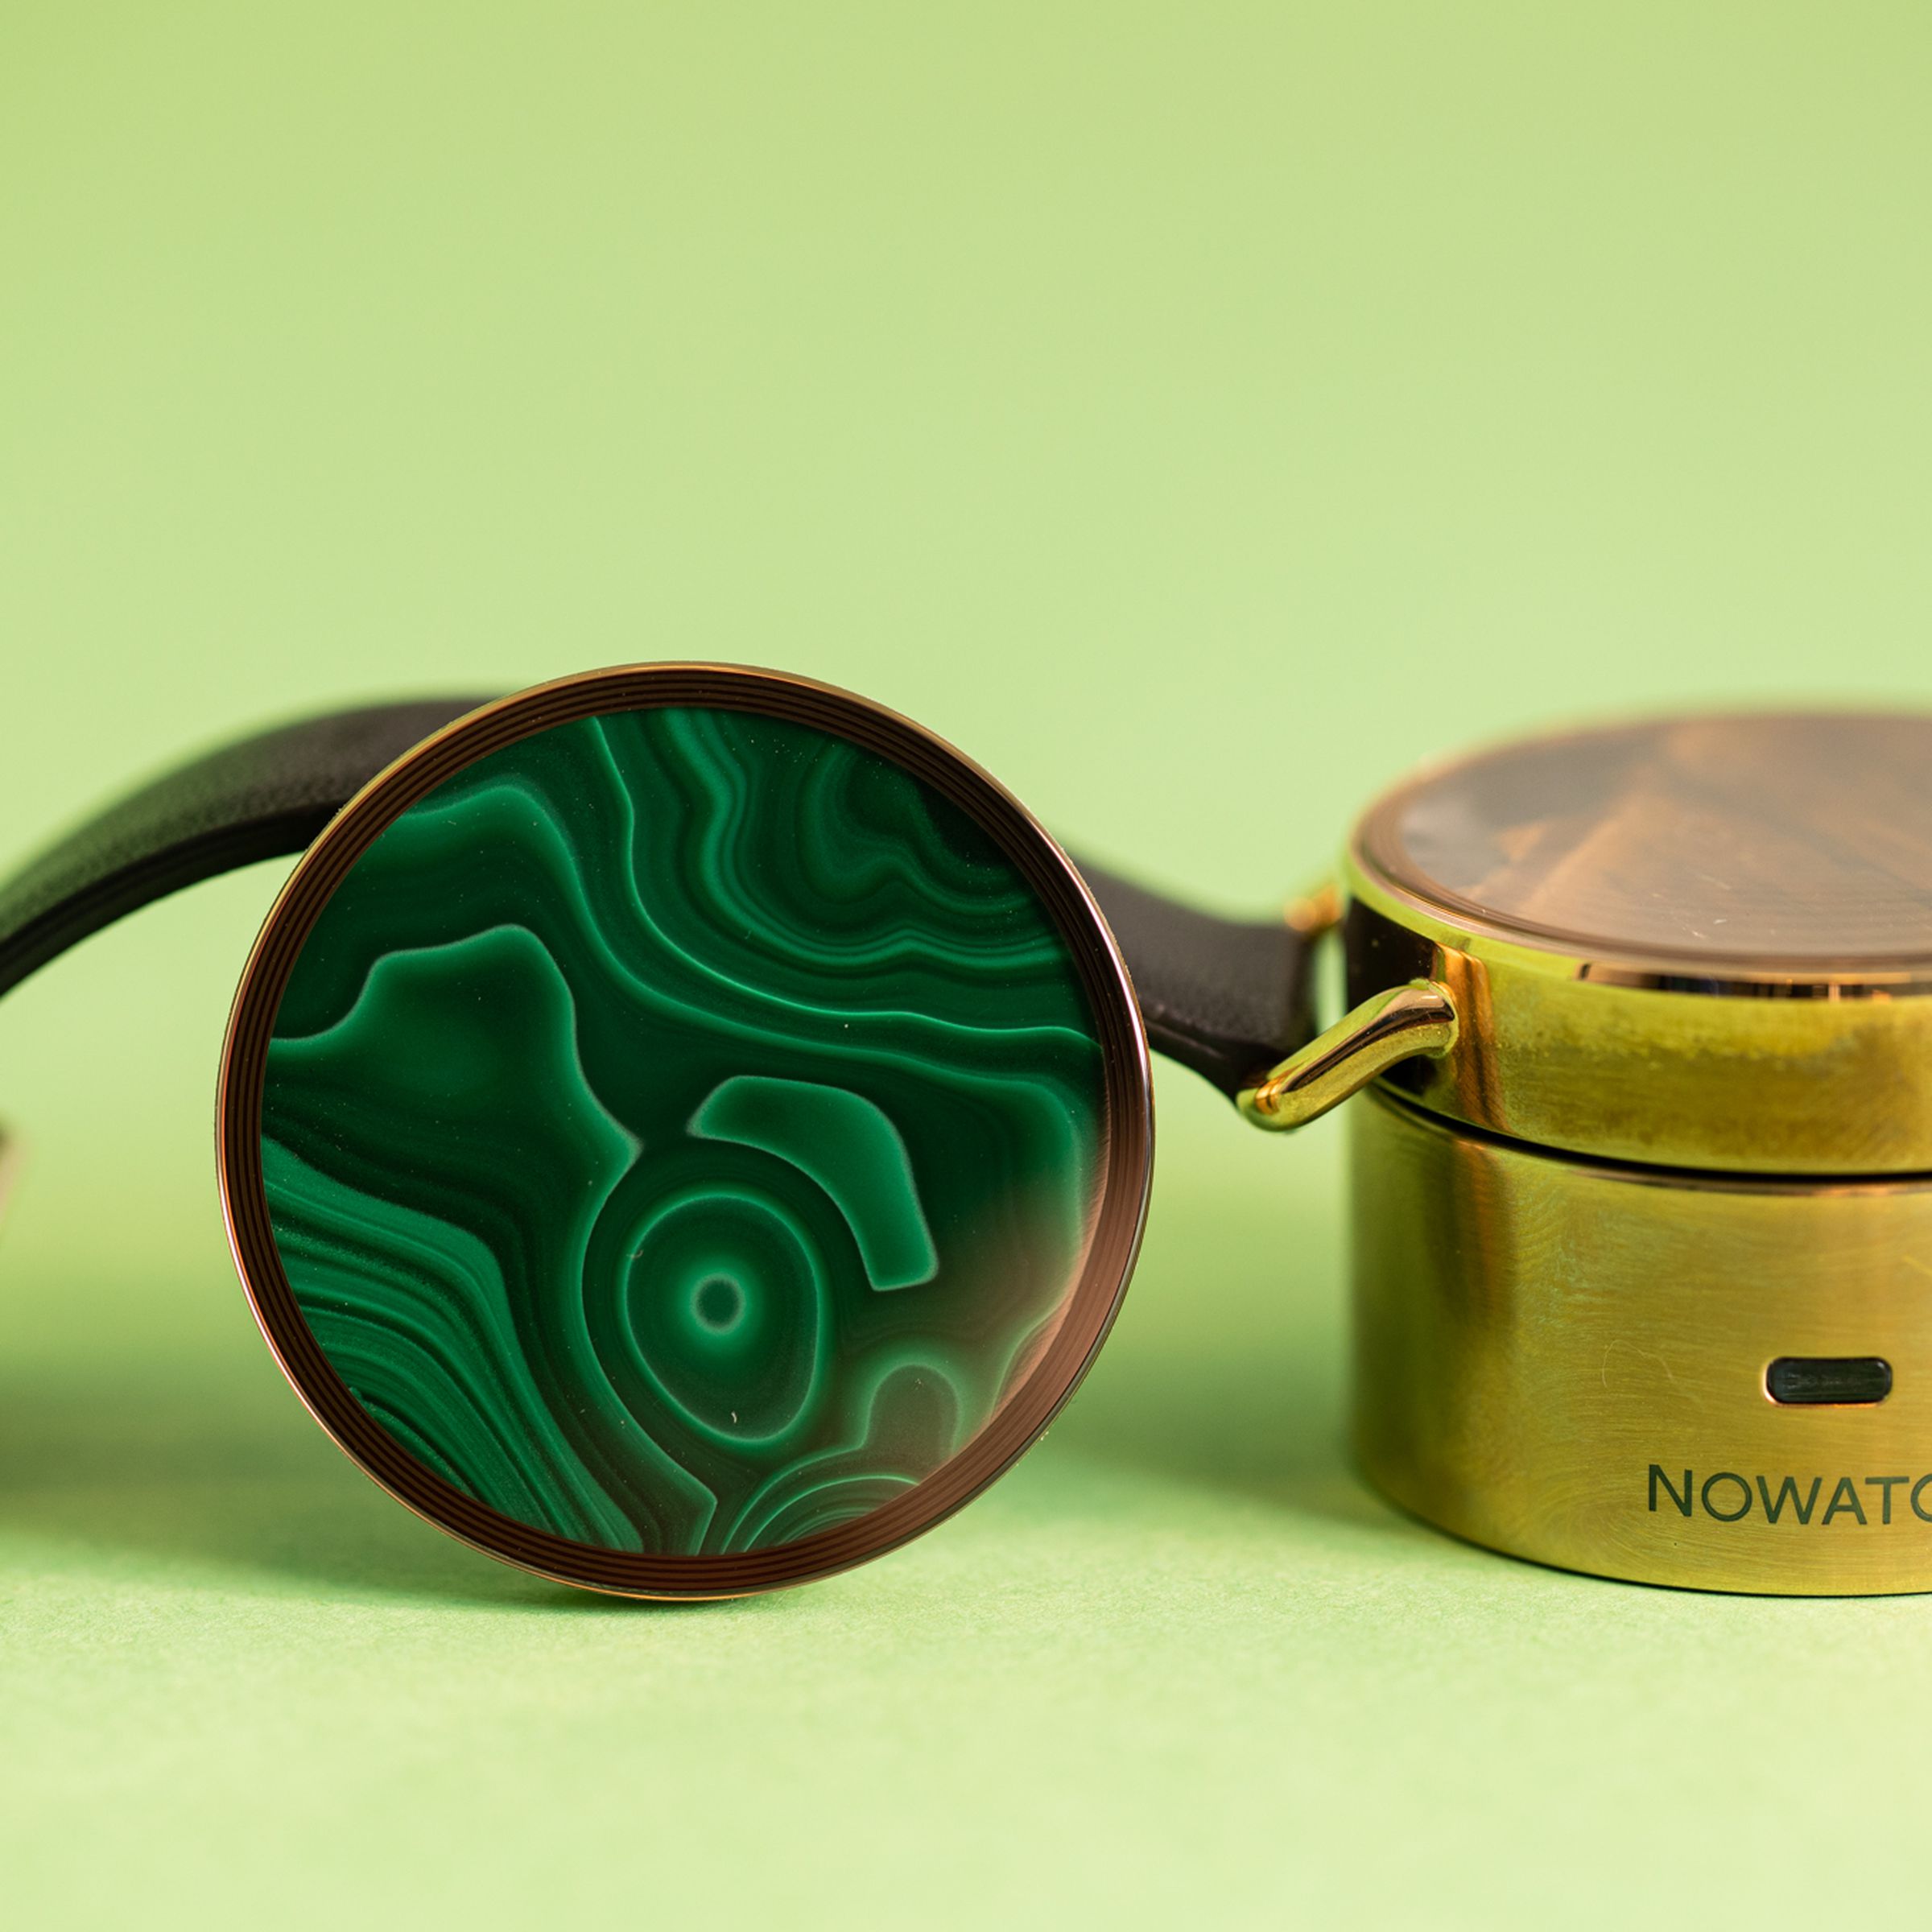 Nowatch device on its charger while an alternate agate disc is propped up next to it.